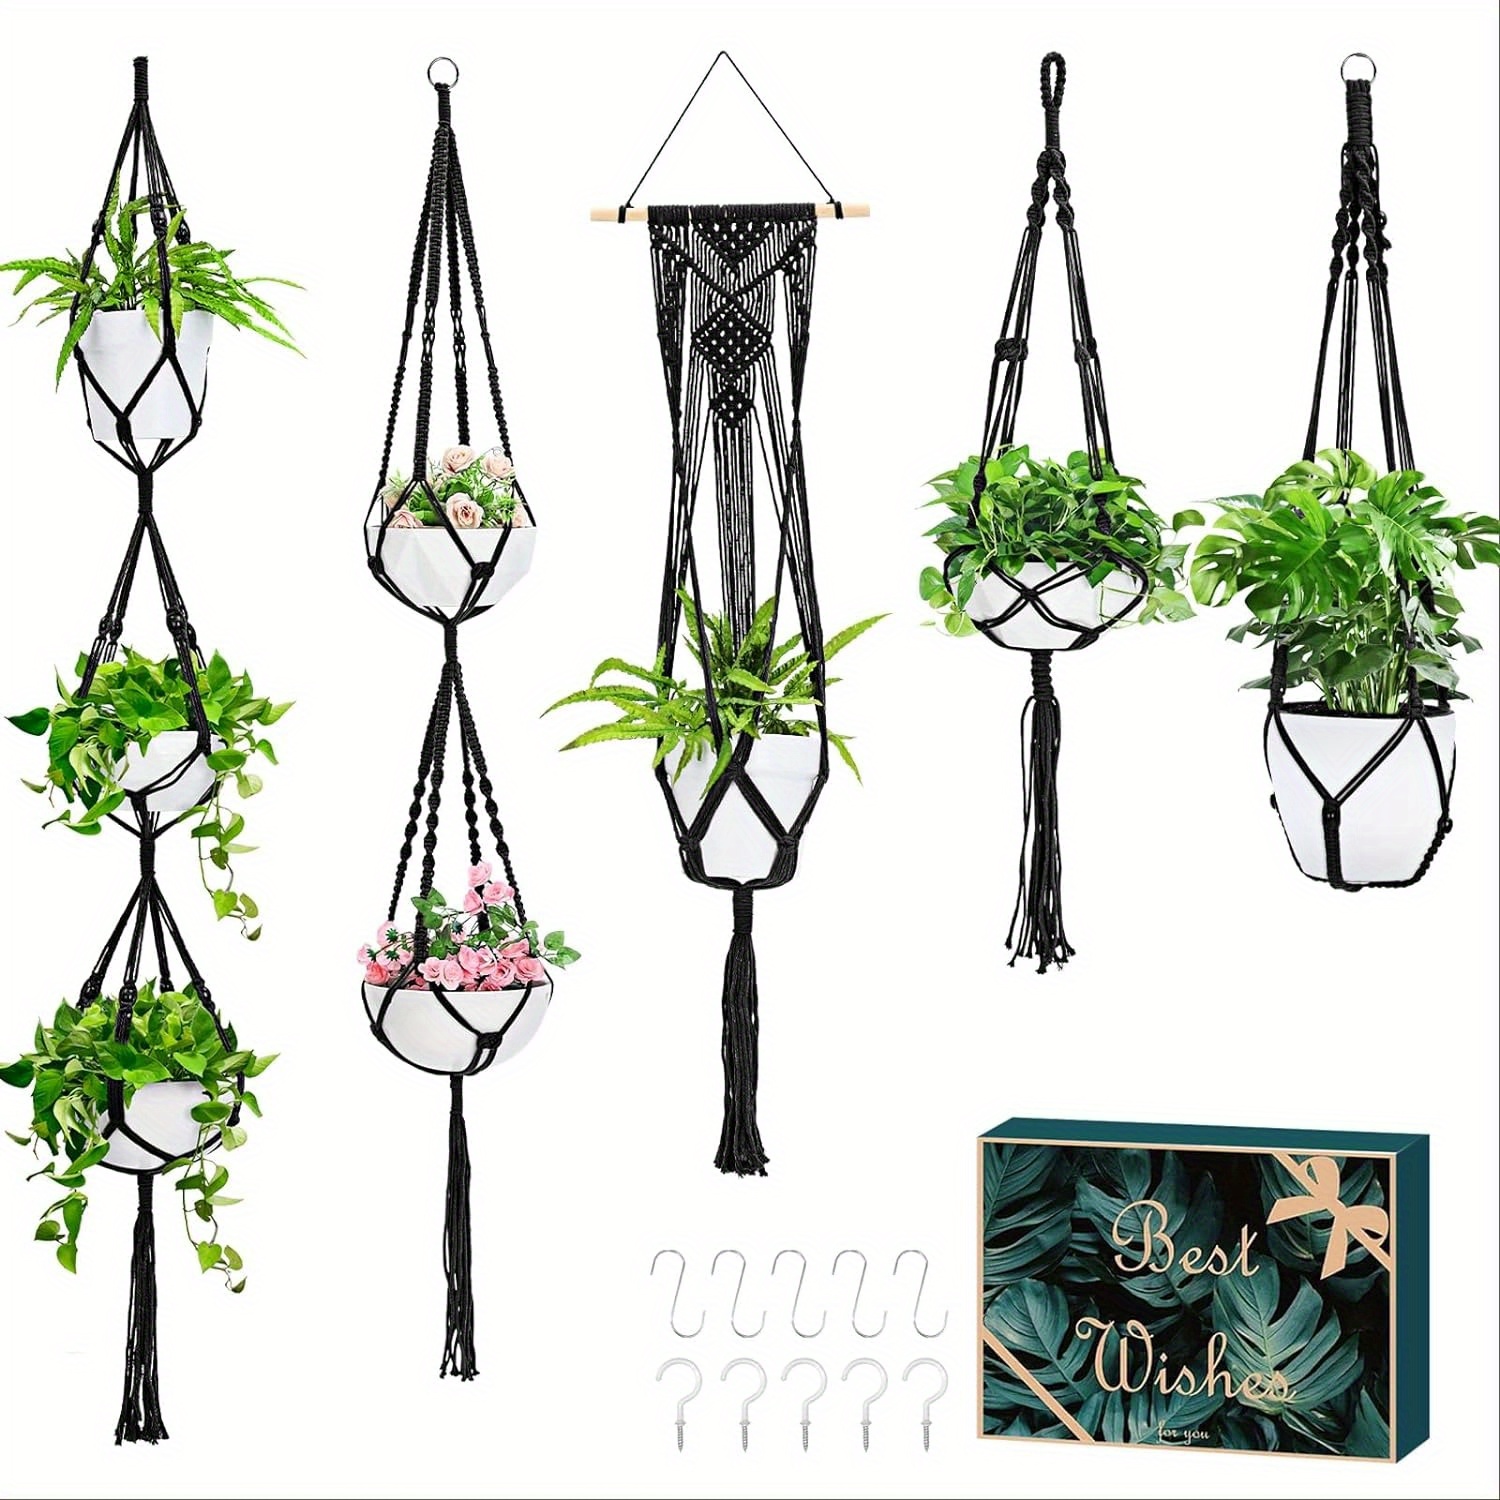 

5 Packs Macrame Plant Hangers With 5 Hooks, Different Ties Handmade Cotton Rope Boho Hanging Planters Set Flower Pots Holder Stand For Indoor Outdoor Home Décor (black)